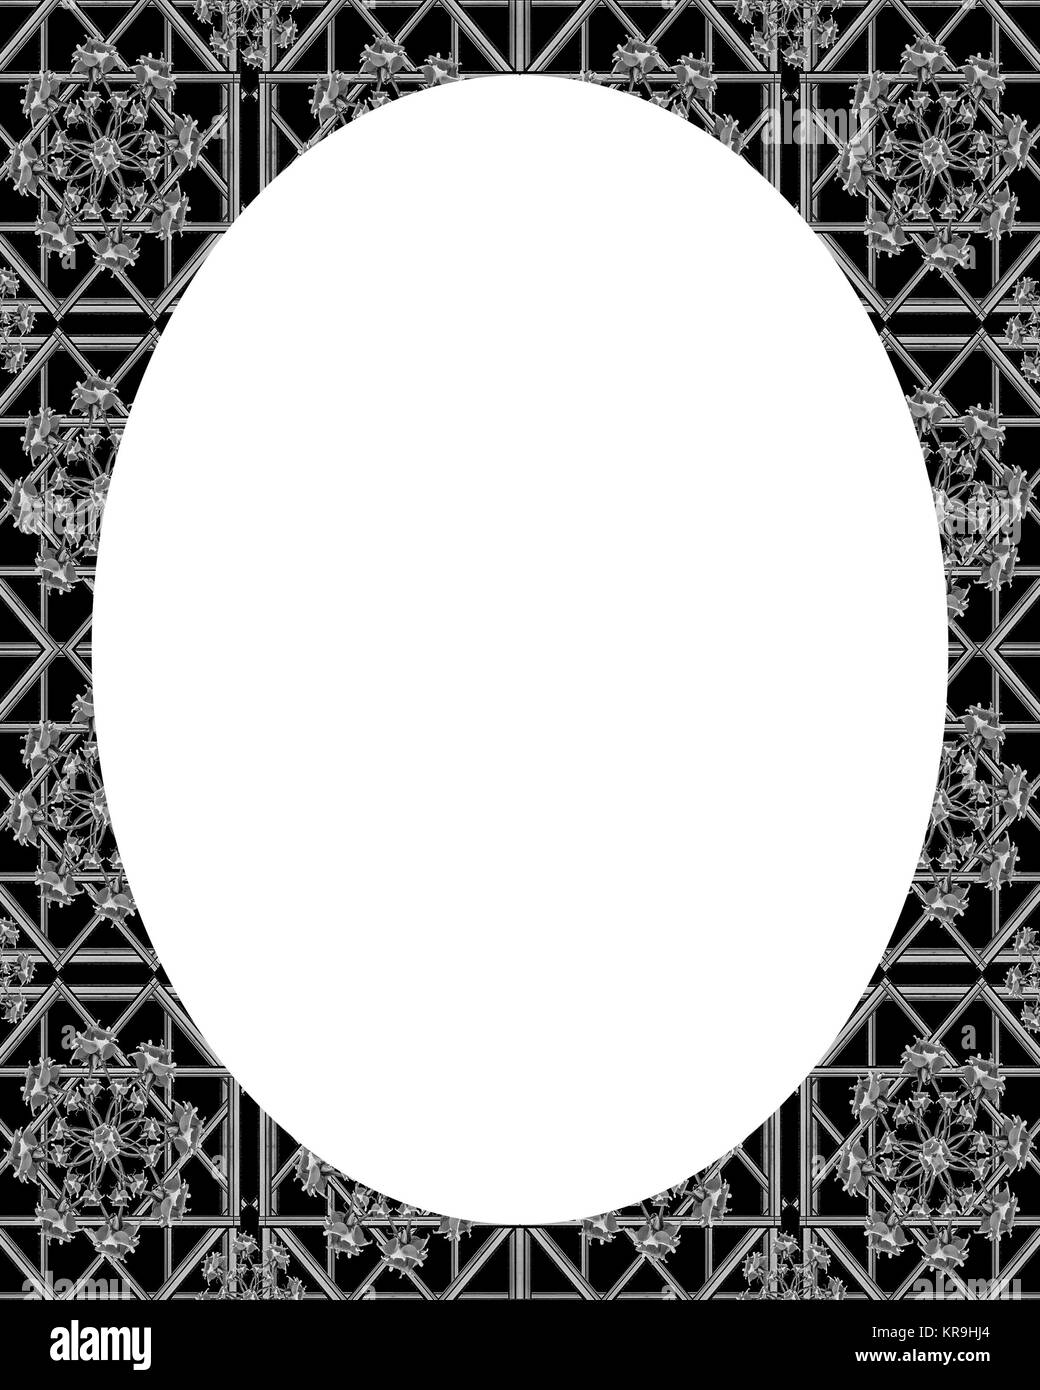 Circle Frame with Ornate Decorated Borders Stock Photo